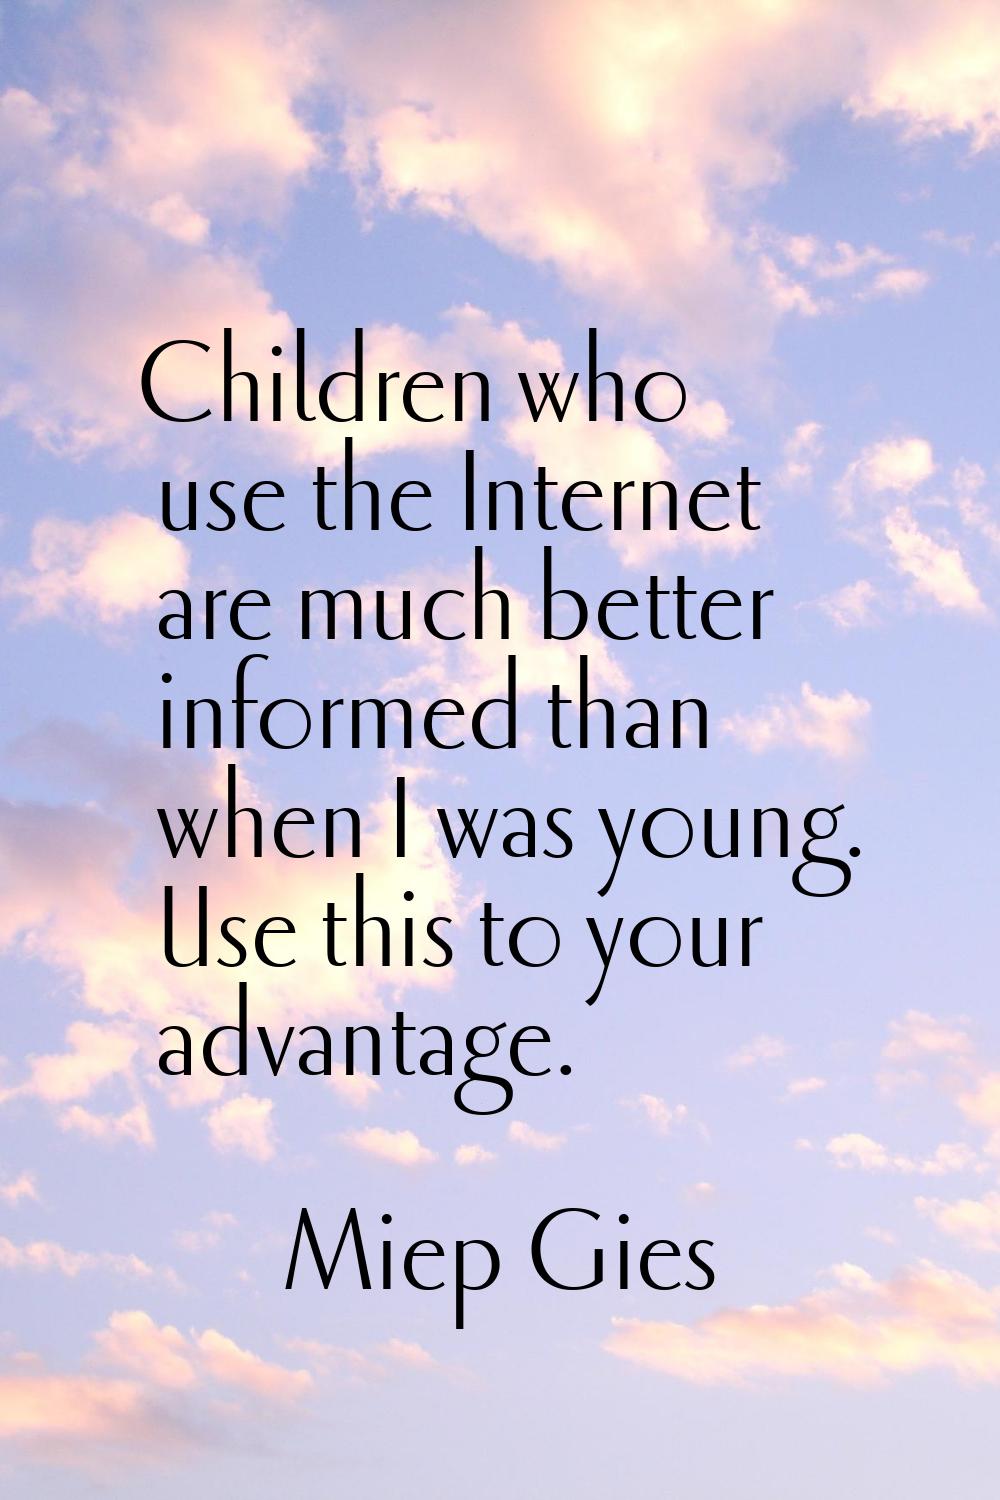 Children who use the Internet are much better informed than when I was young. Use this to your adva